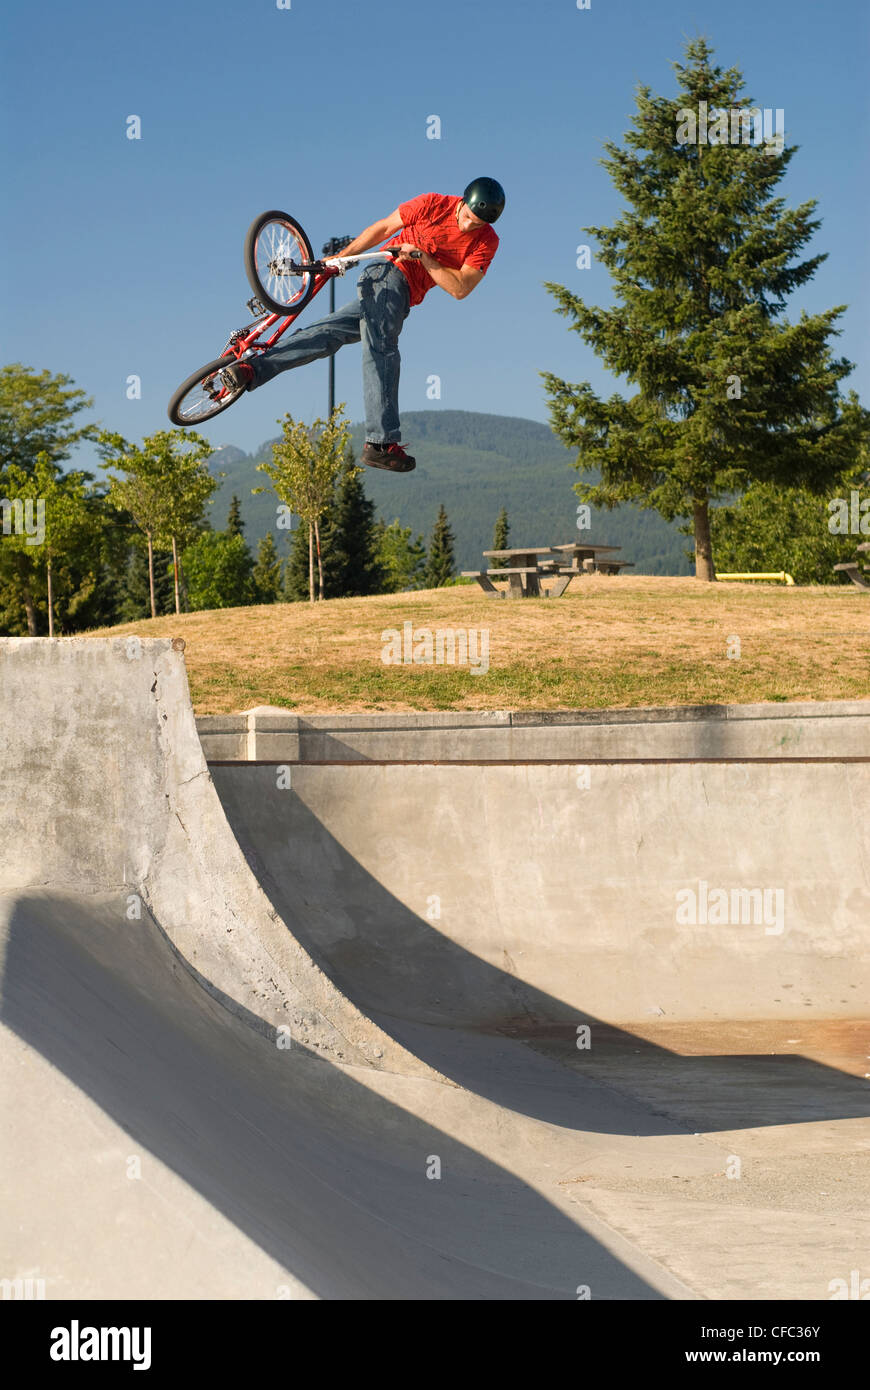 BMXer with a can-can air on the quarter at Lafarge Skatepark, Coquitlam, BC, Canada. Stock Photo